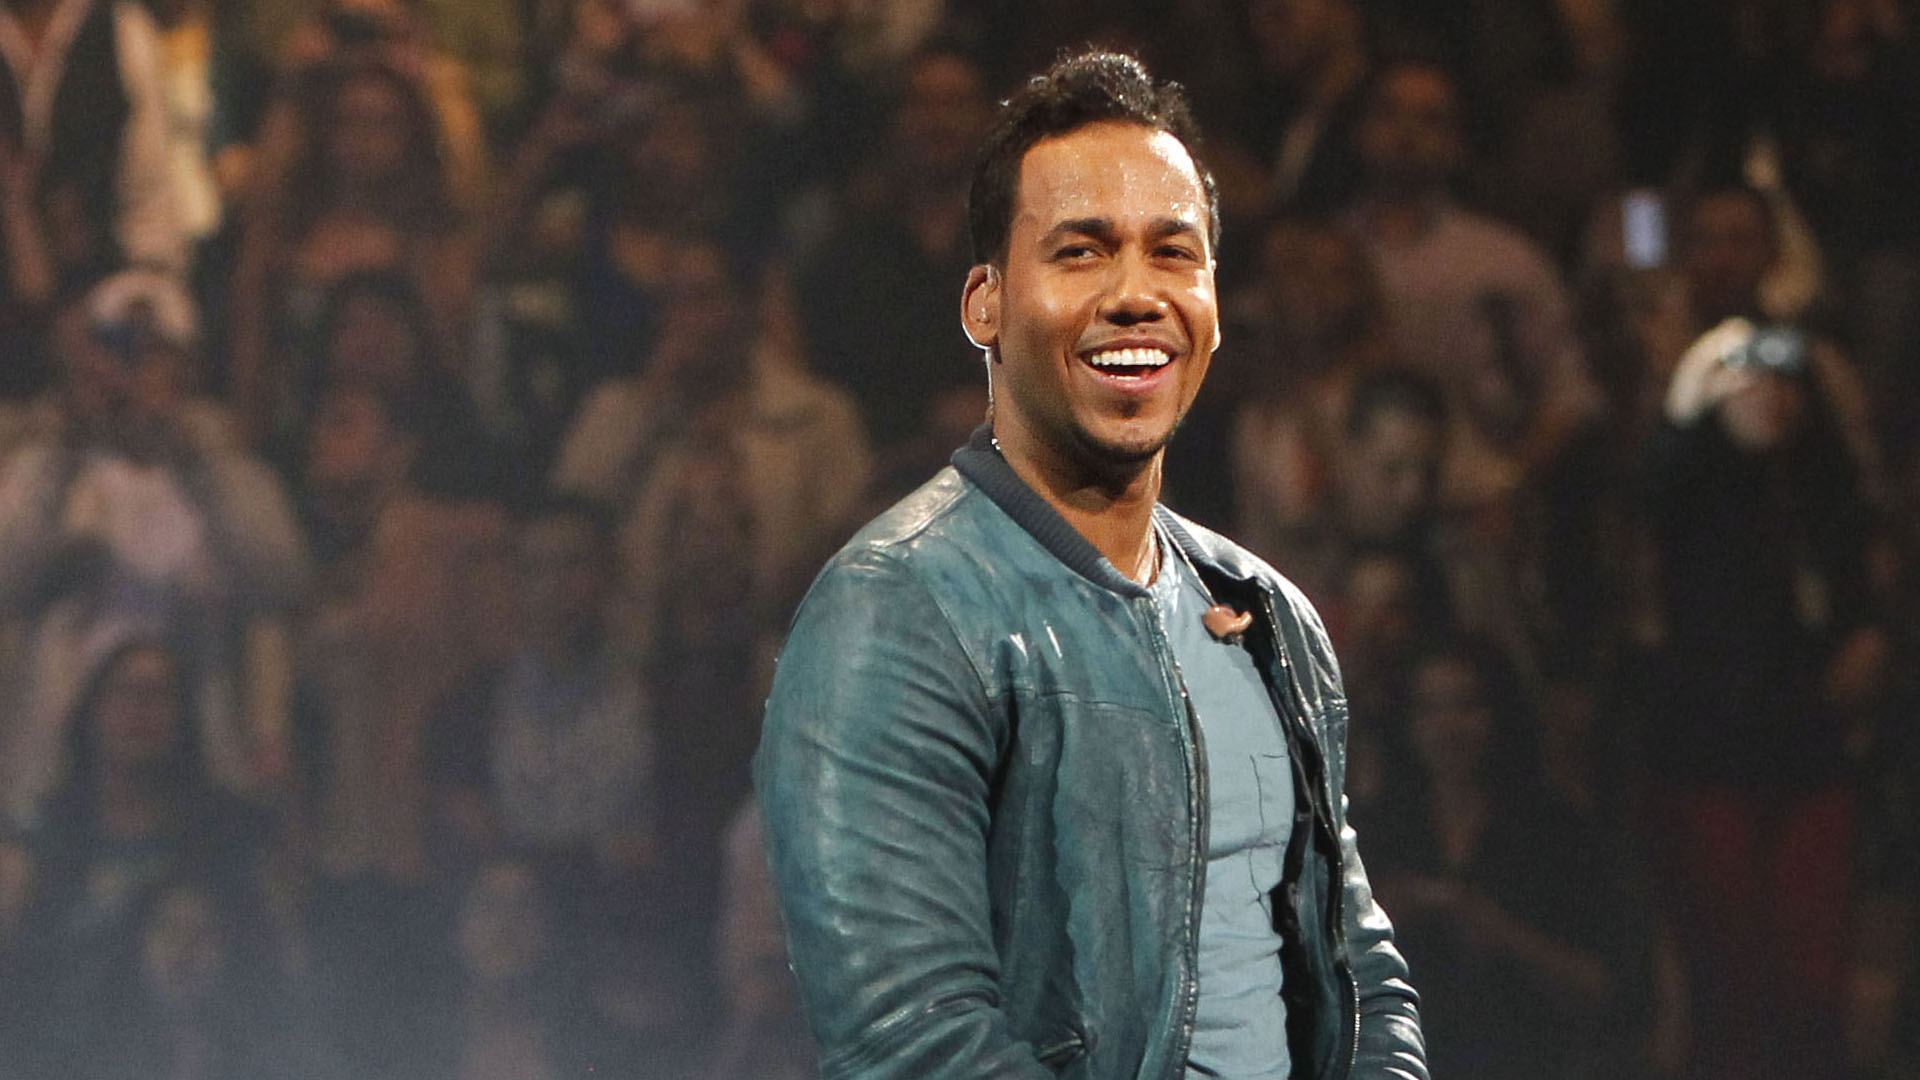 Romeo Santos performs during a concert at Madison Square Garden, Friday, Feb. 24, 2012 in New York. (AP Photo/Jason DeCrow)